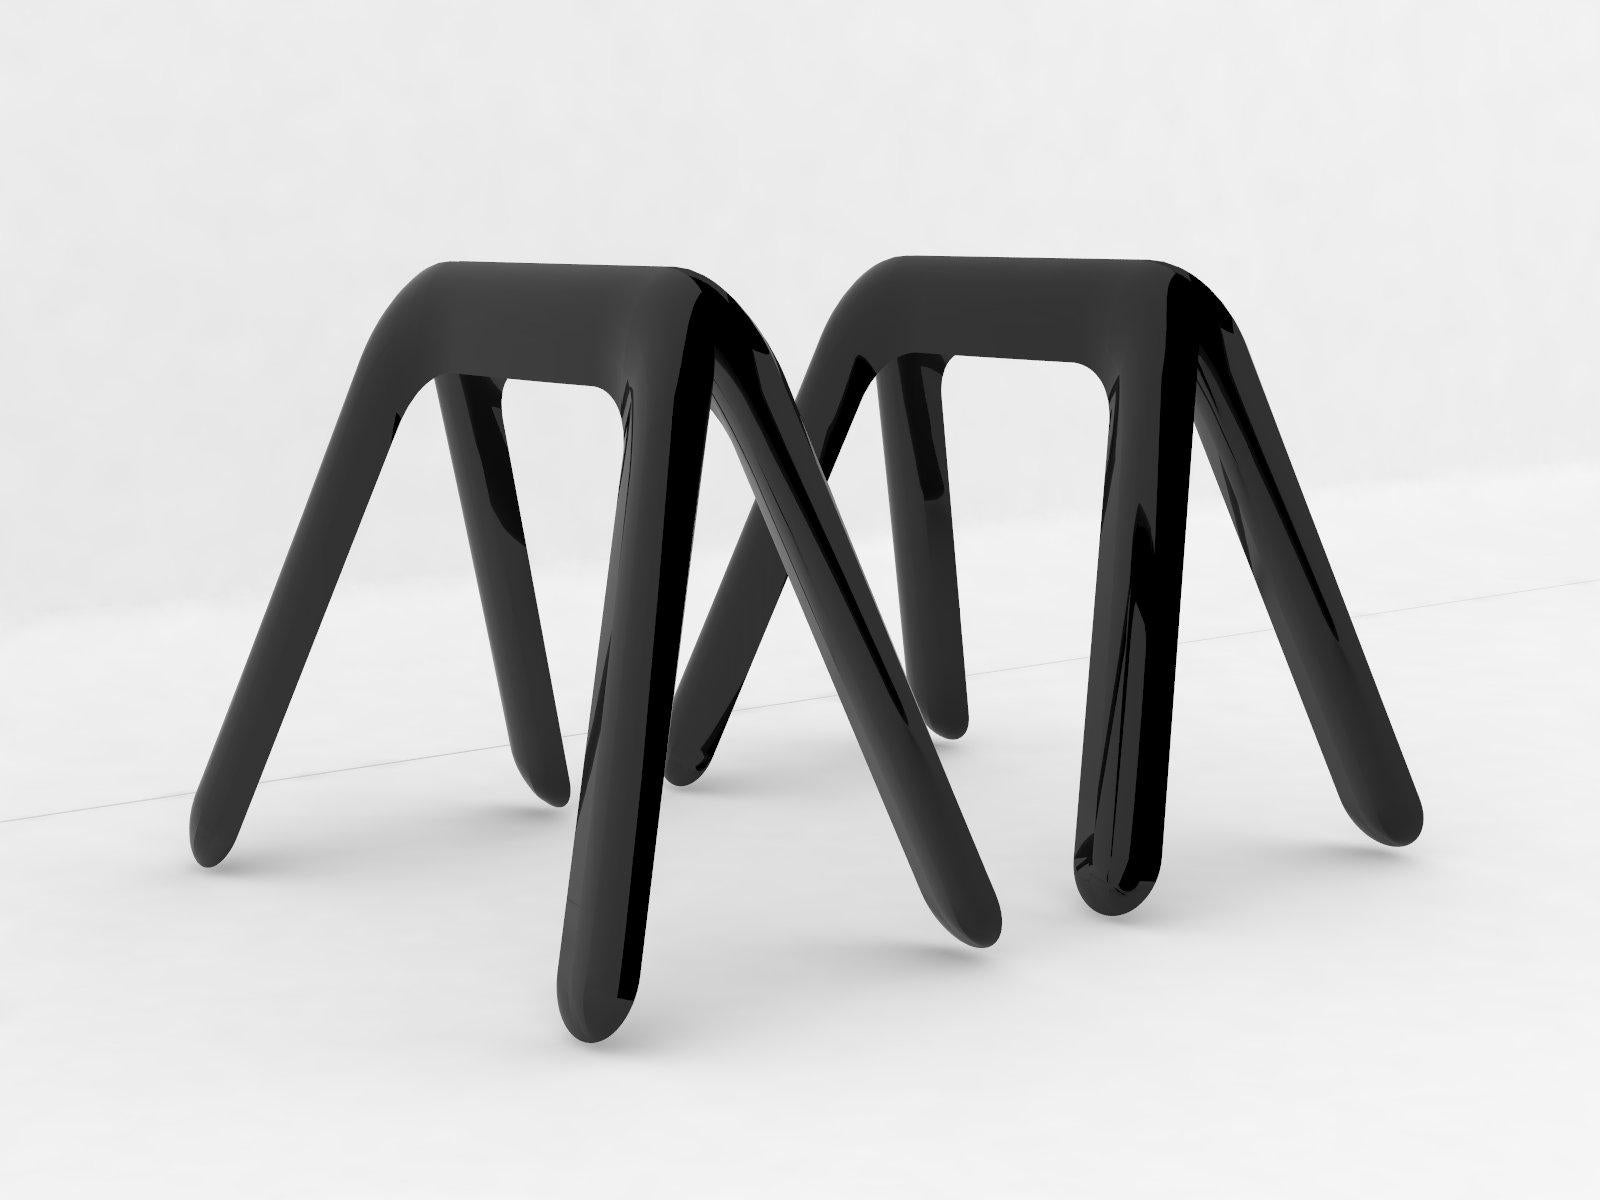 Pair of Kozka trestles in black glossy by Zieta
Dimensions: D 31 x W 51 x H 45 cm 
Material: Carbon steel.
Available in other colors and in stainless steel.

Kozka is our new member of table structures. It is a multitasking construction.